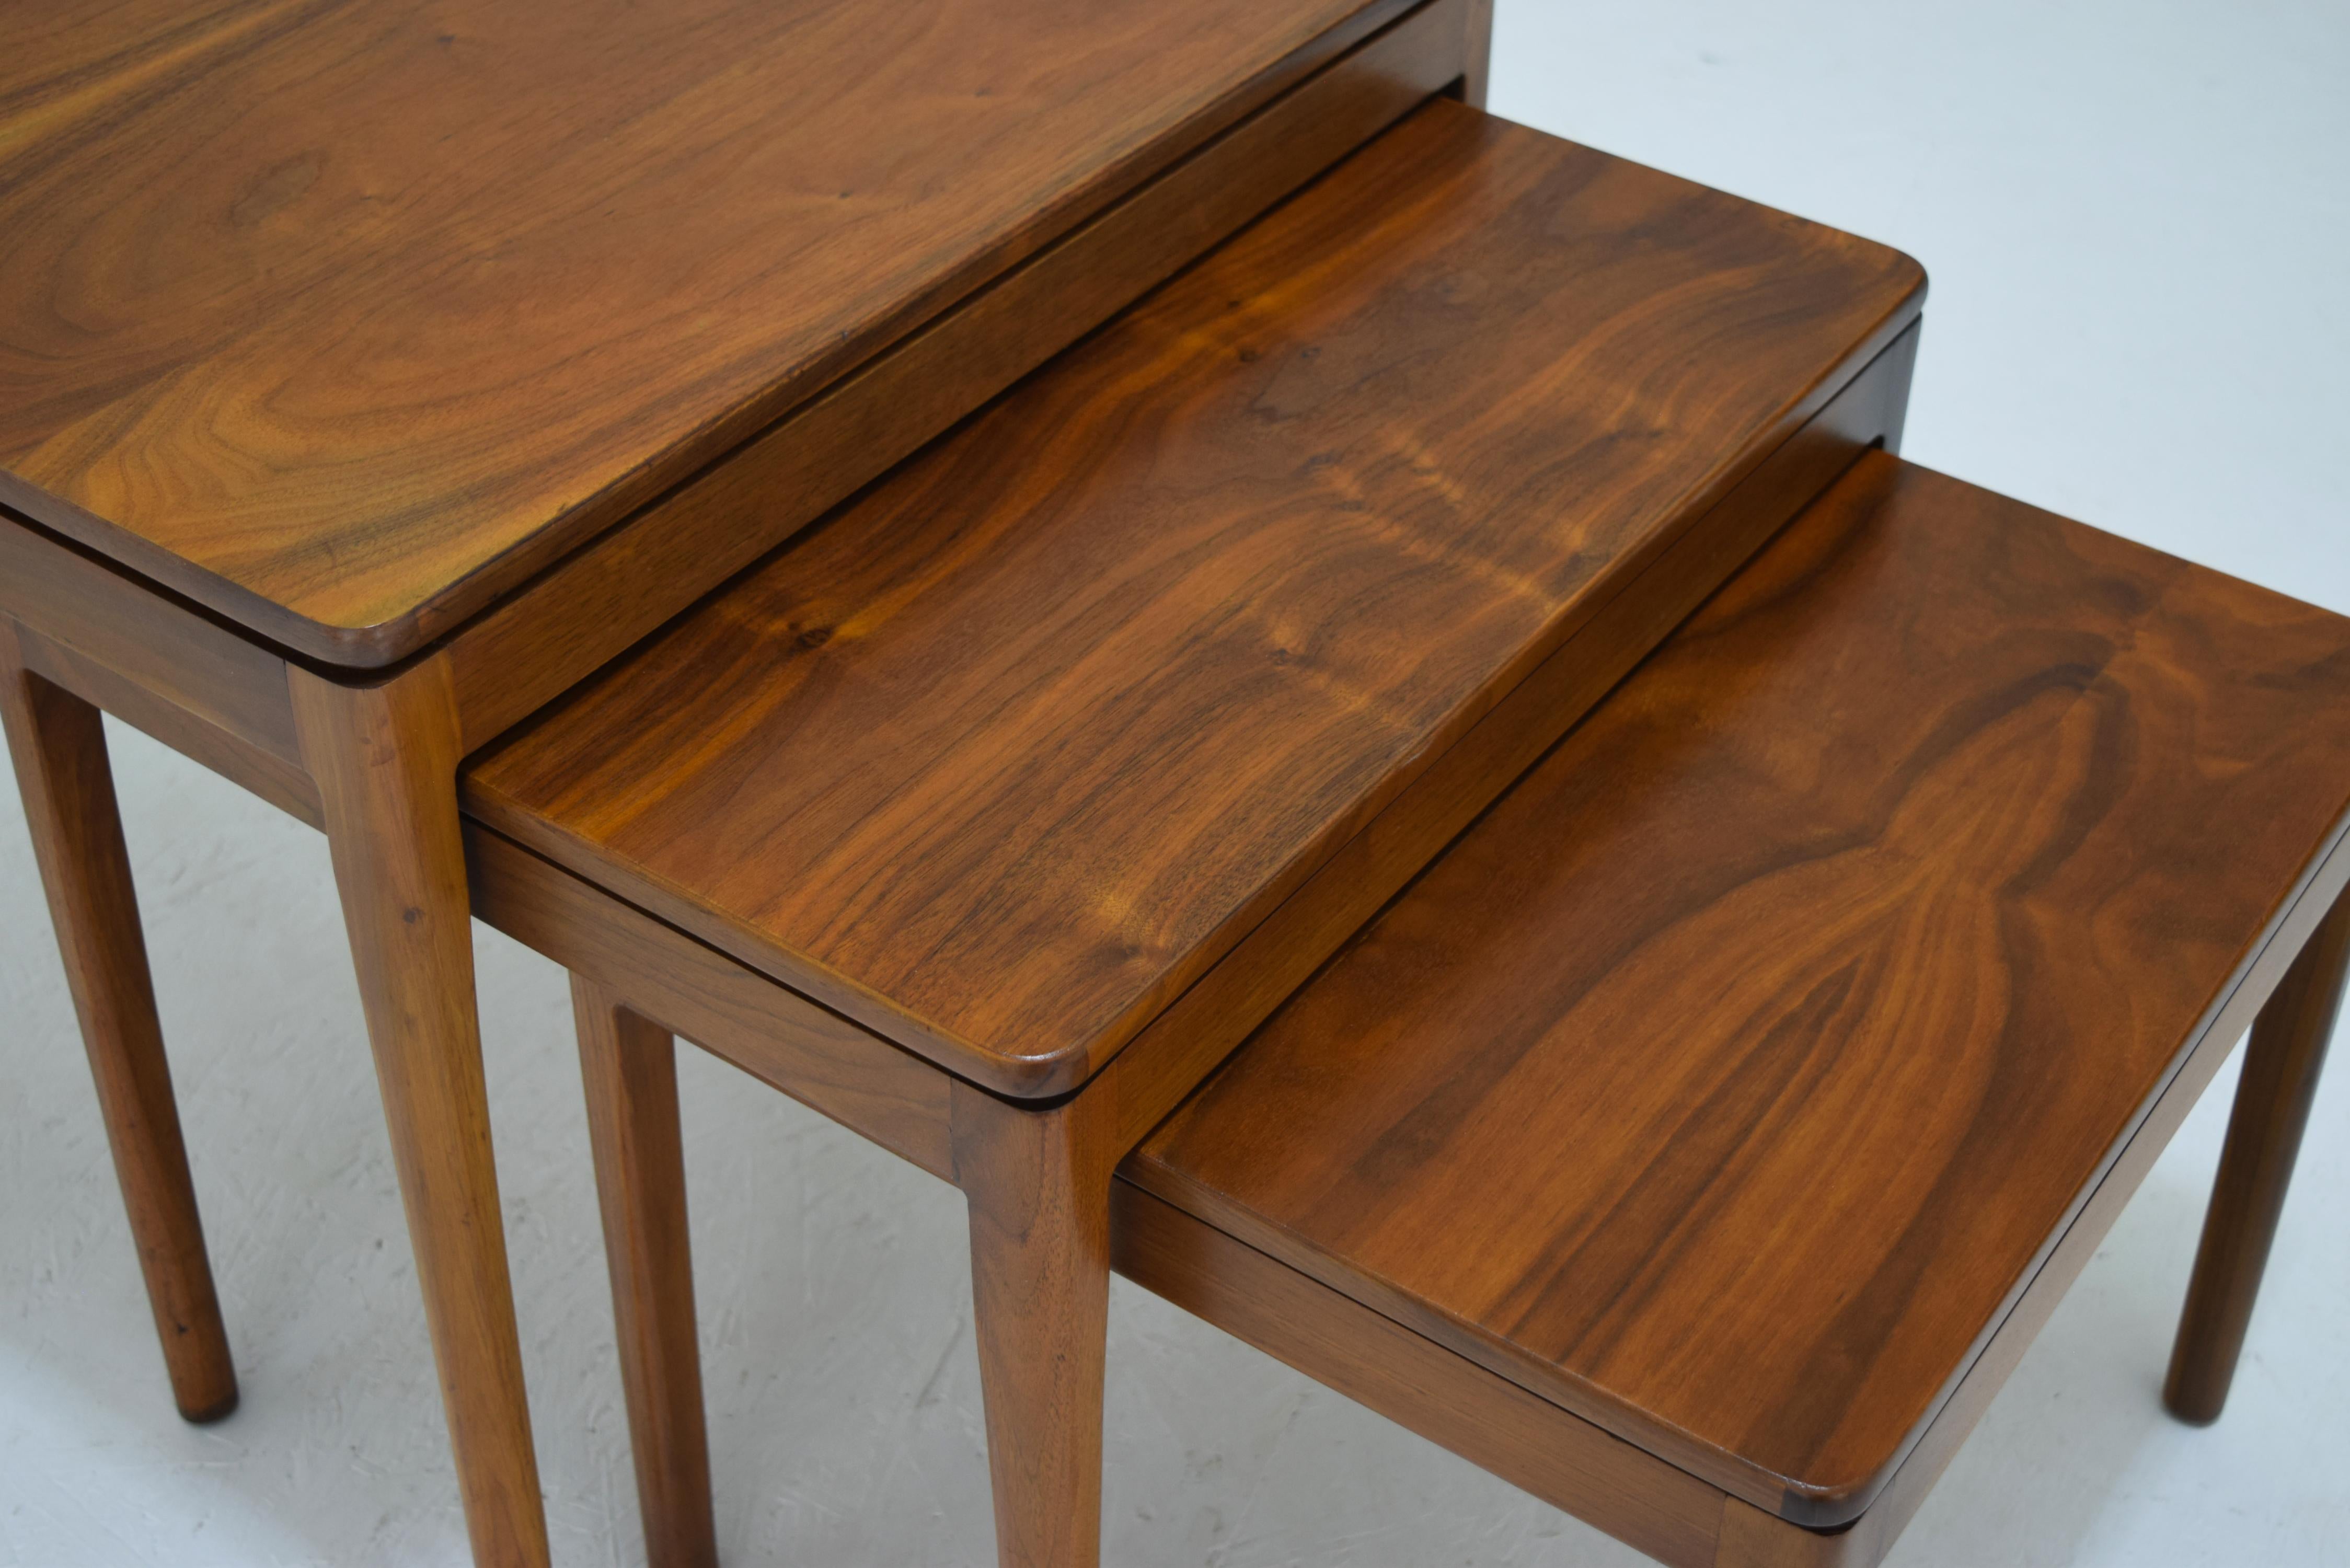 Like new.  In stunning condition with new lacquer surfaces and precisely color matched. All walnut construction. Nesting tables that stack for room saving modernism. Produced 1959. Marked to underside.
Sizes:
18 x 18 x 15.25